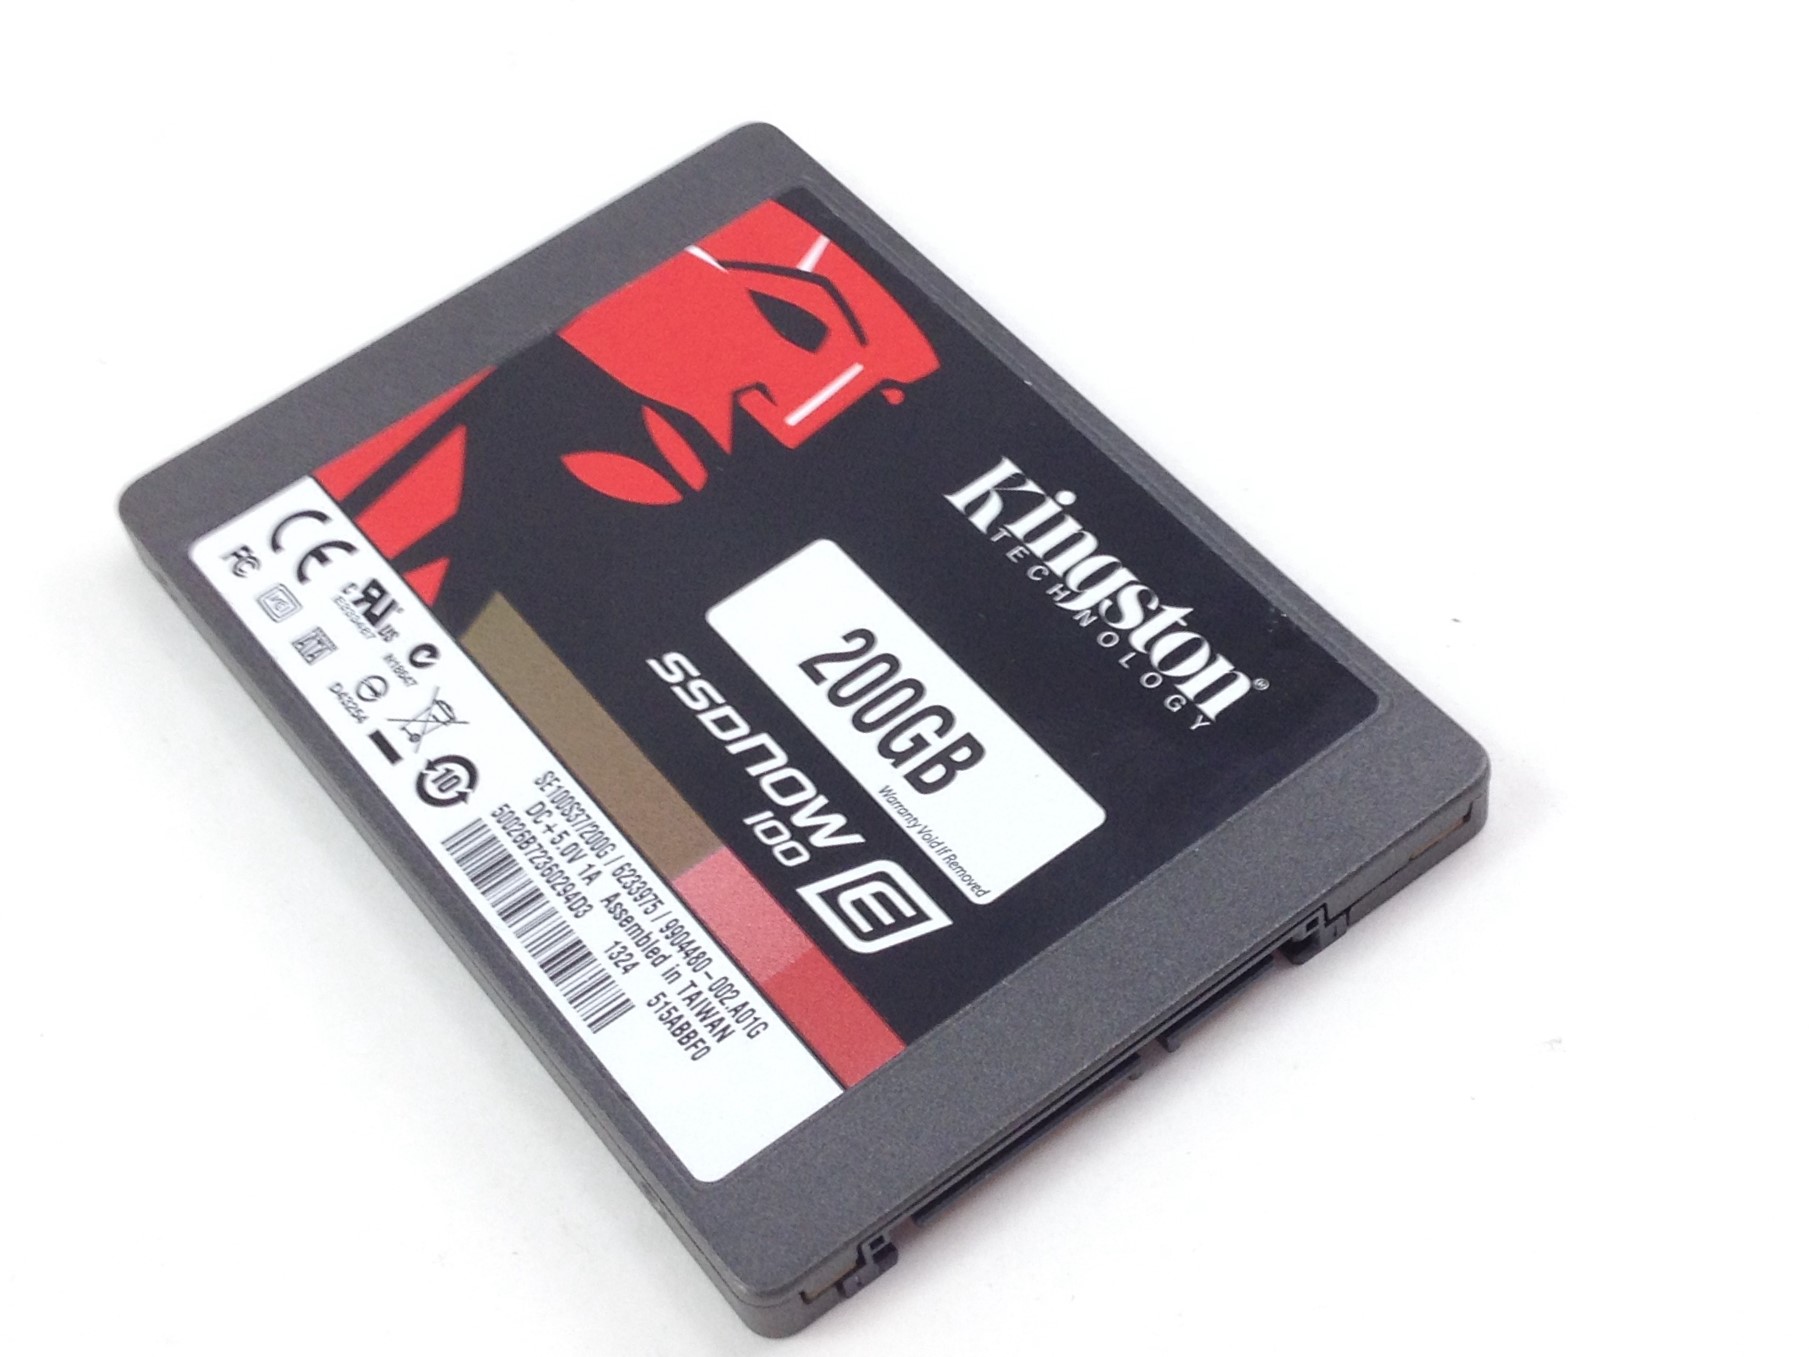 Kingston SSDnow 200GB 6Gb/s 2.5'' Solid State Drive (SE100S37)